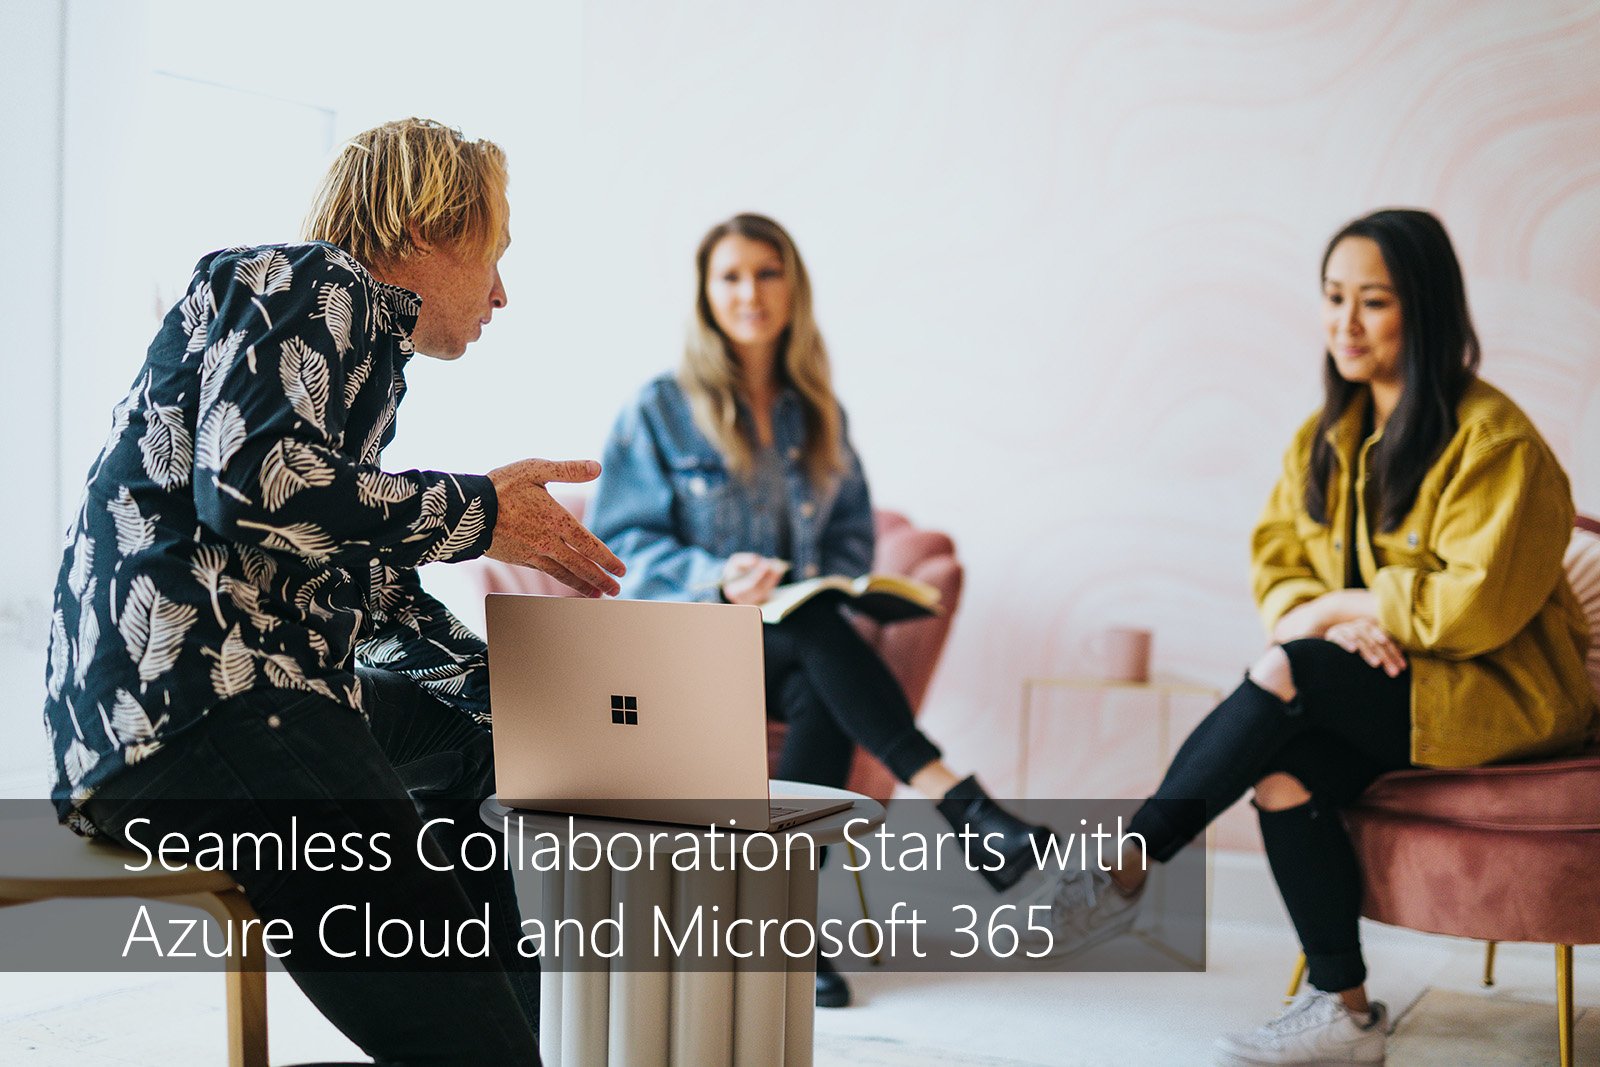 TMC-blog-seamless-collaboration-starts-with-azure-cloud-and-microsoft-365